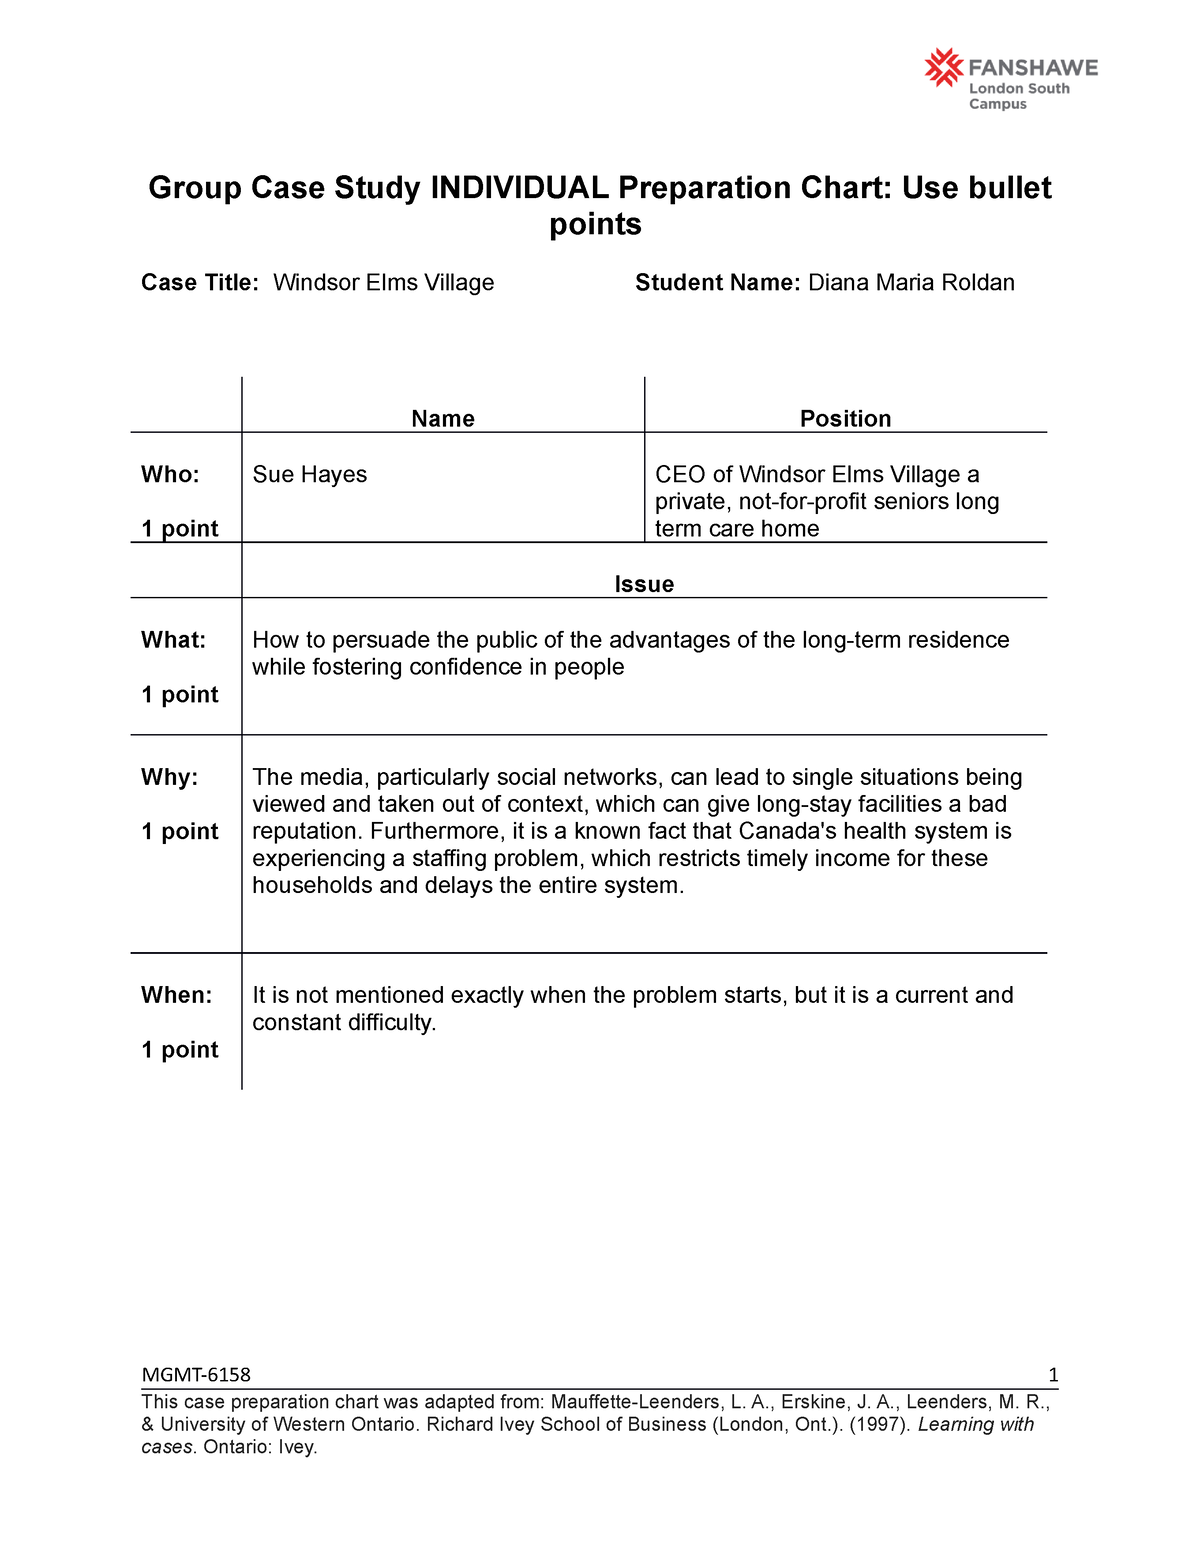 group case study individual preparation chart